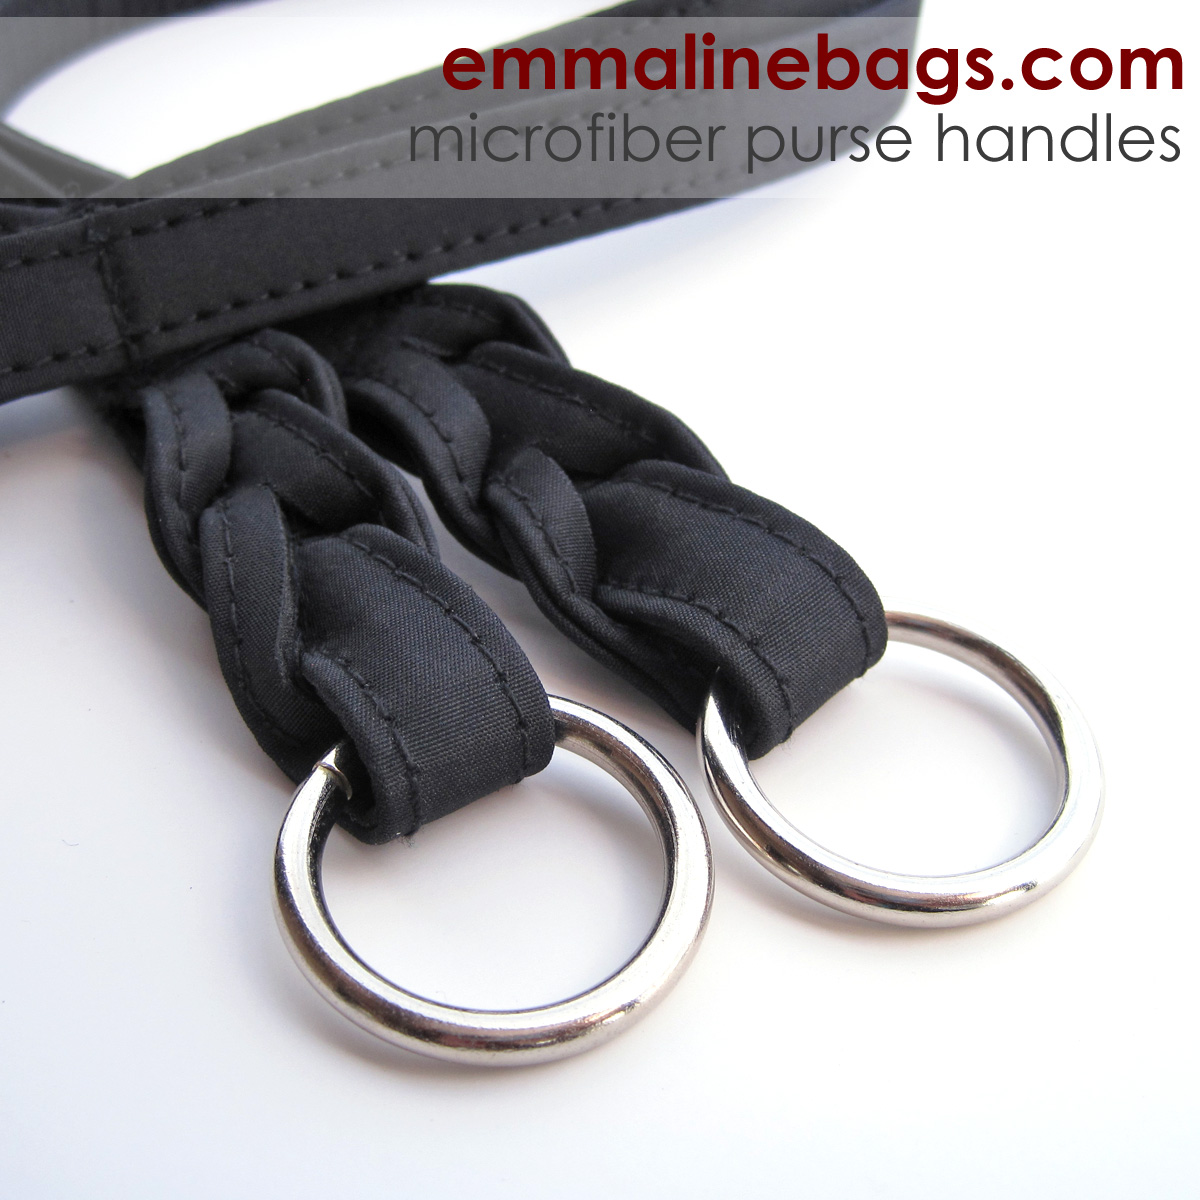 Emmaline Bags: Sewing Patterns and Purse Supplies: Microfiber Purse Handles: What To Do With ...